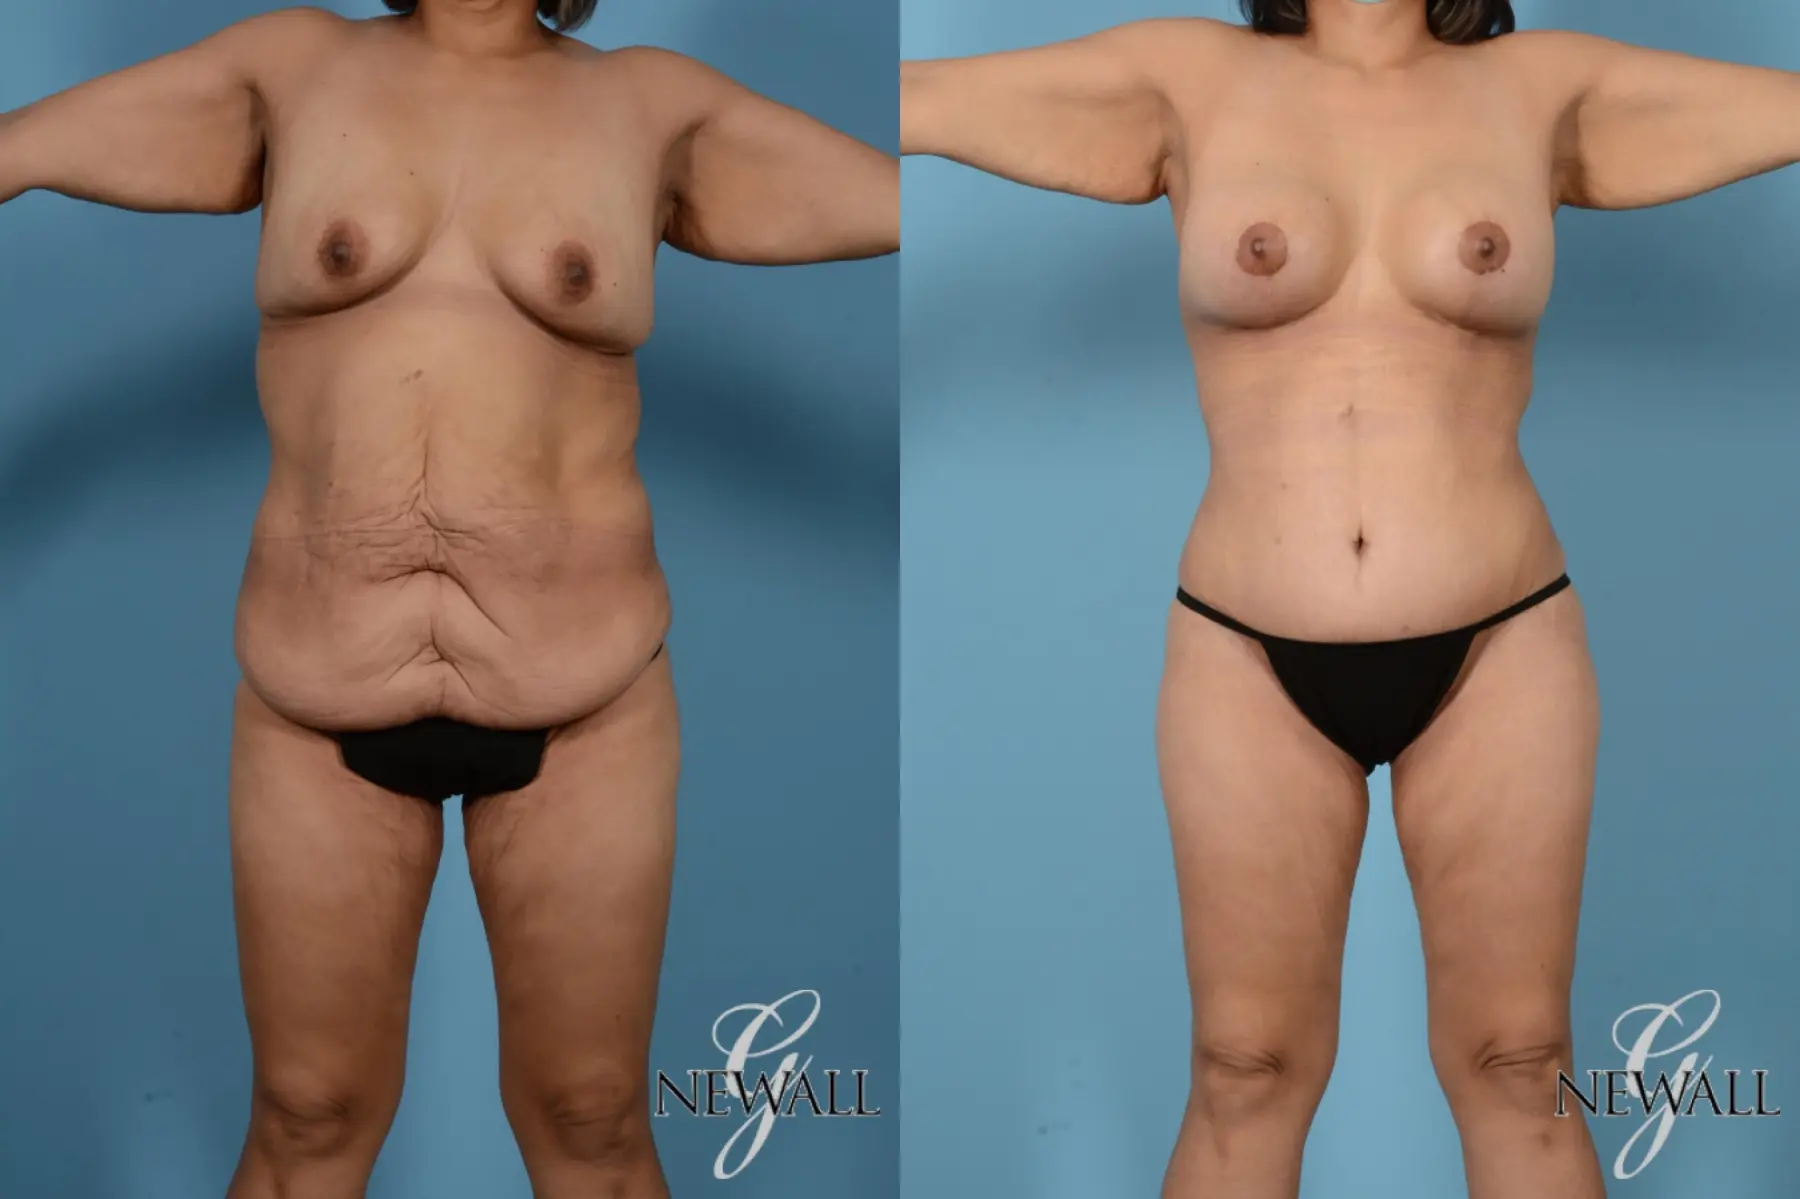 Tummy Tuck: Patient 13 - Before and After  